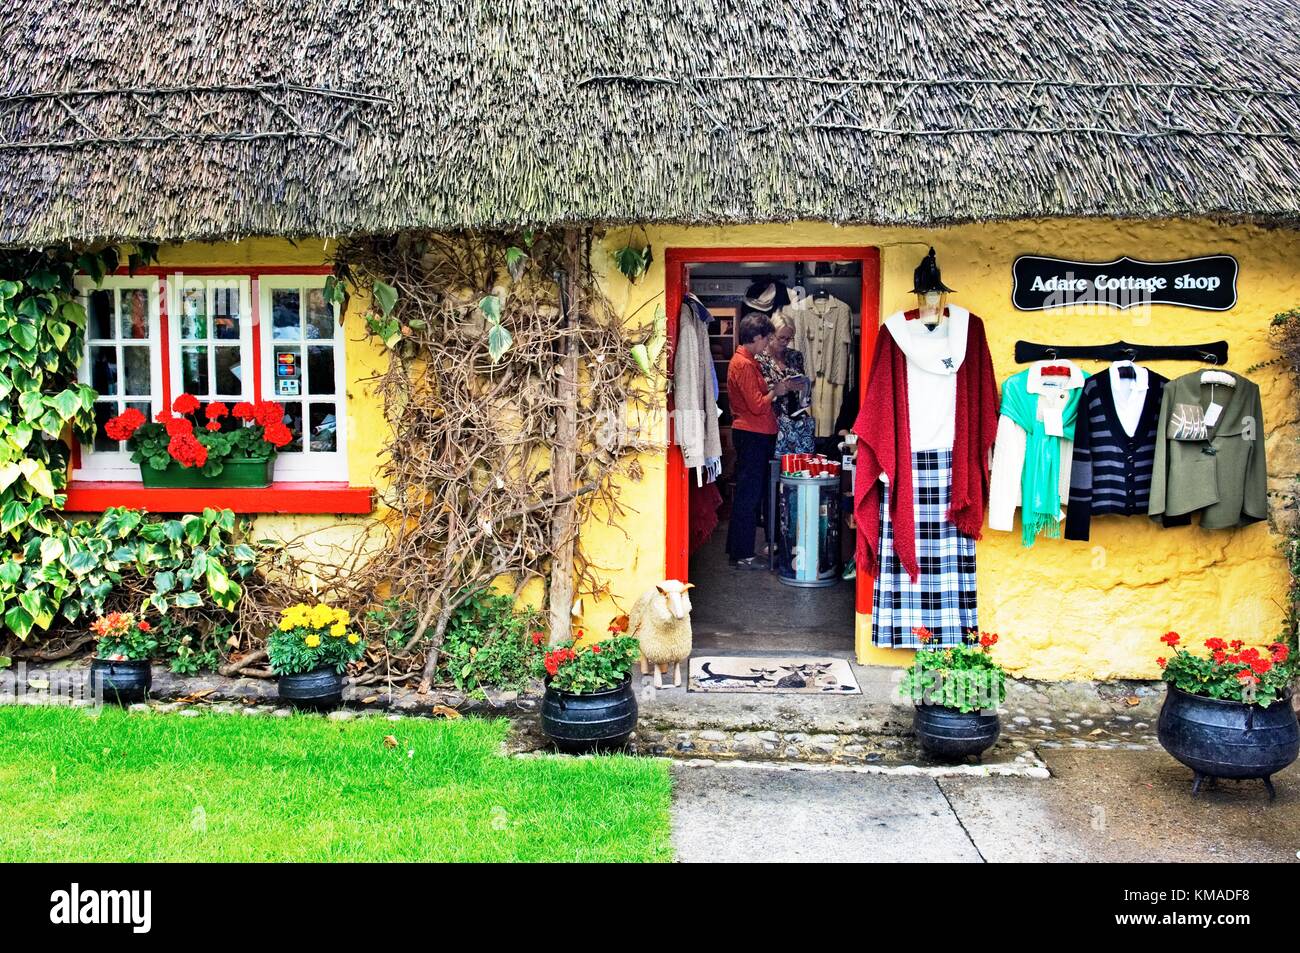 Thatched cottage shop in the picturesque village of Adare, County Limerick, Ireland. Stock Photo